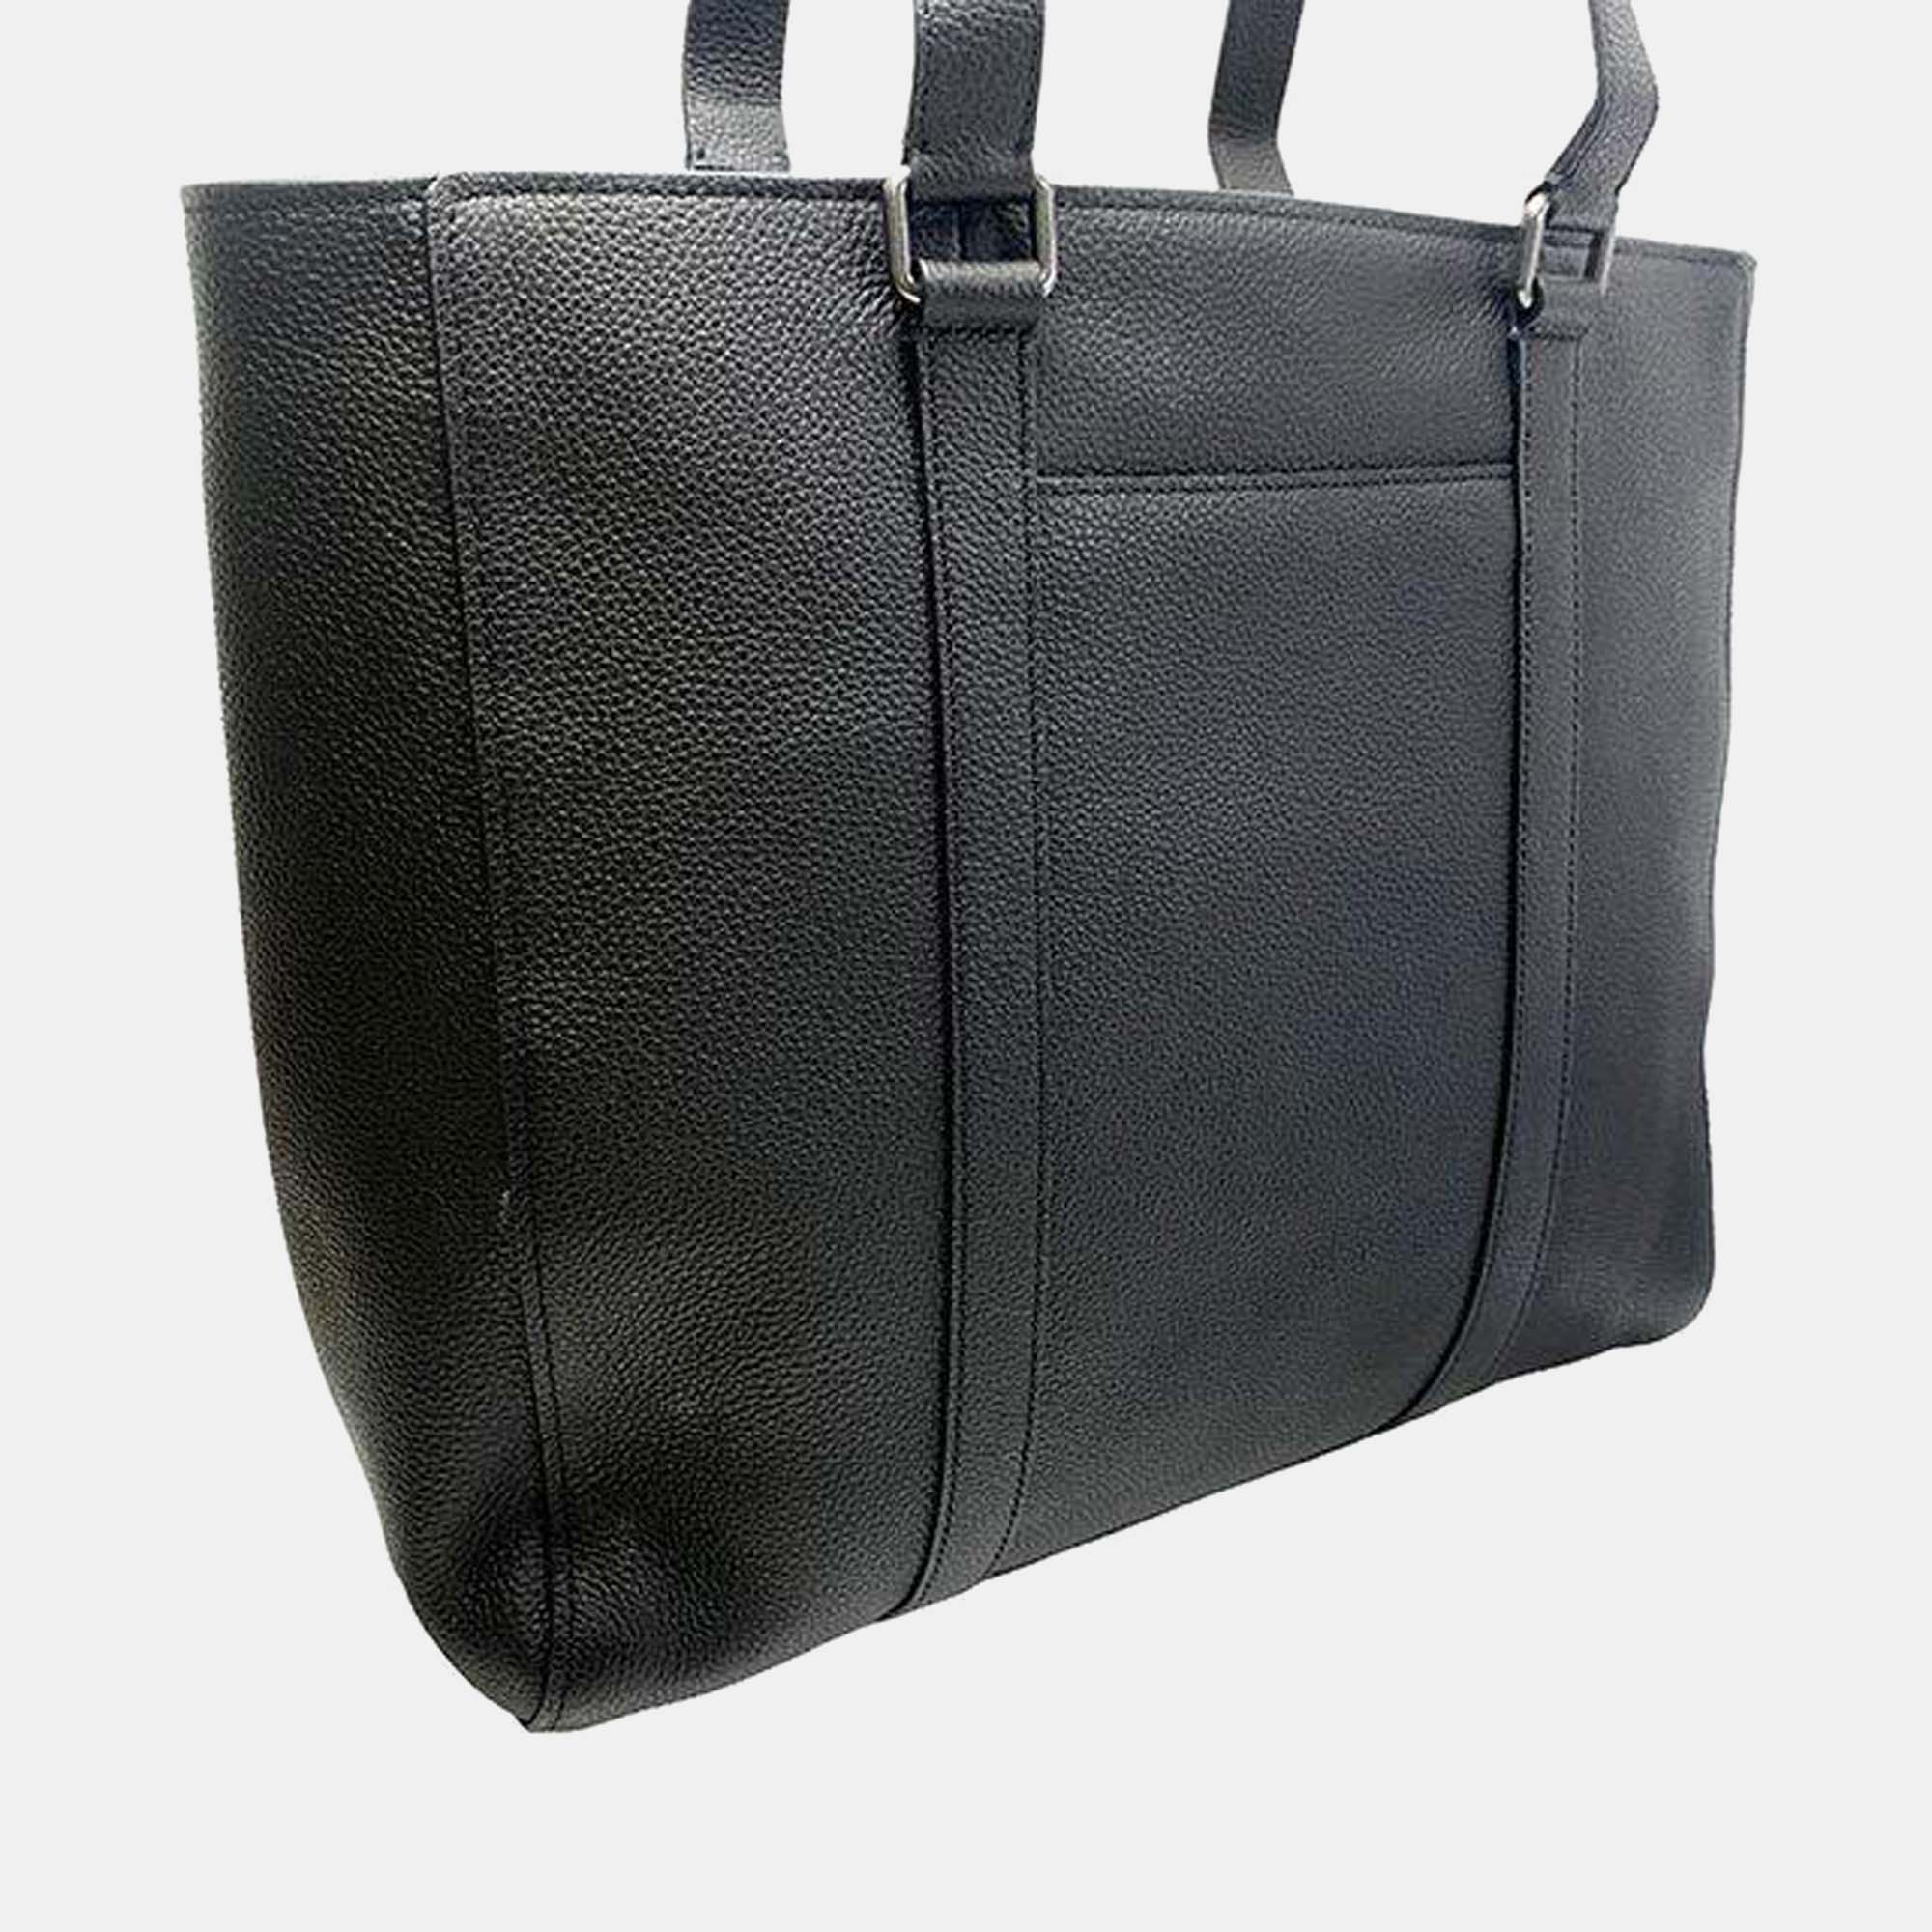 Coach Black - Leather - Double Handle Tote Bag